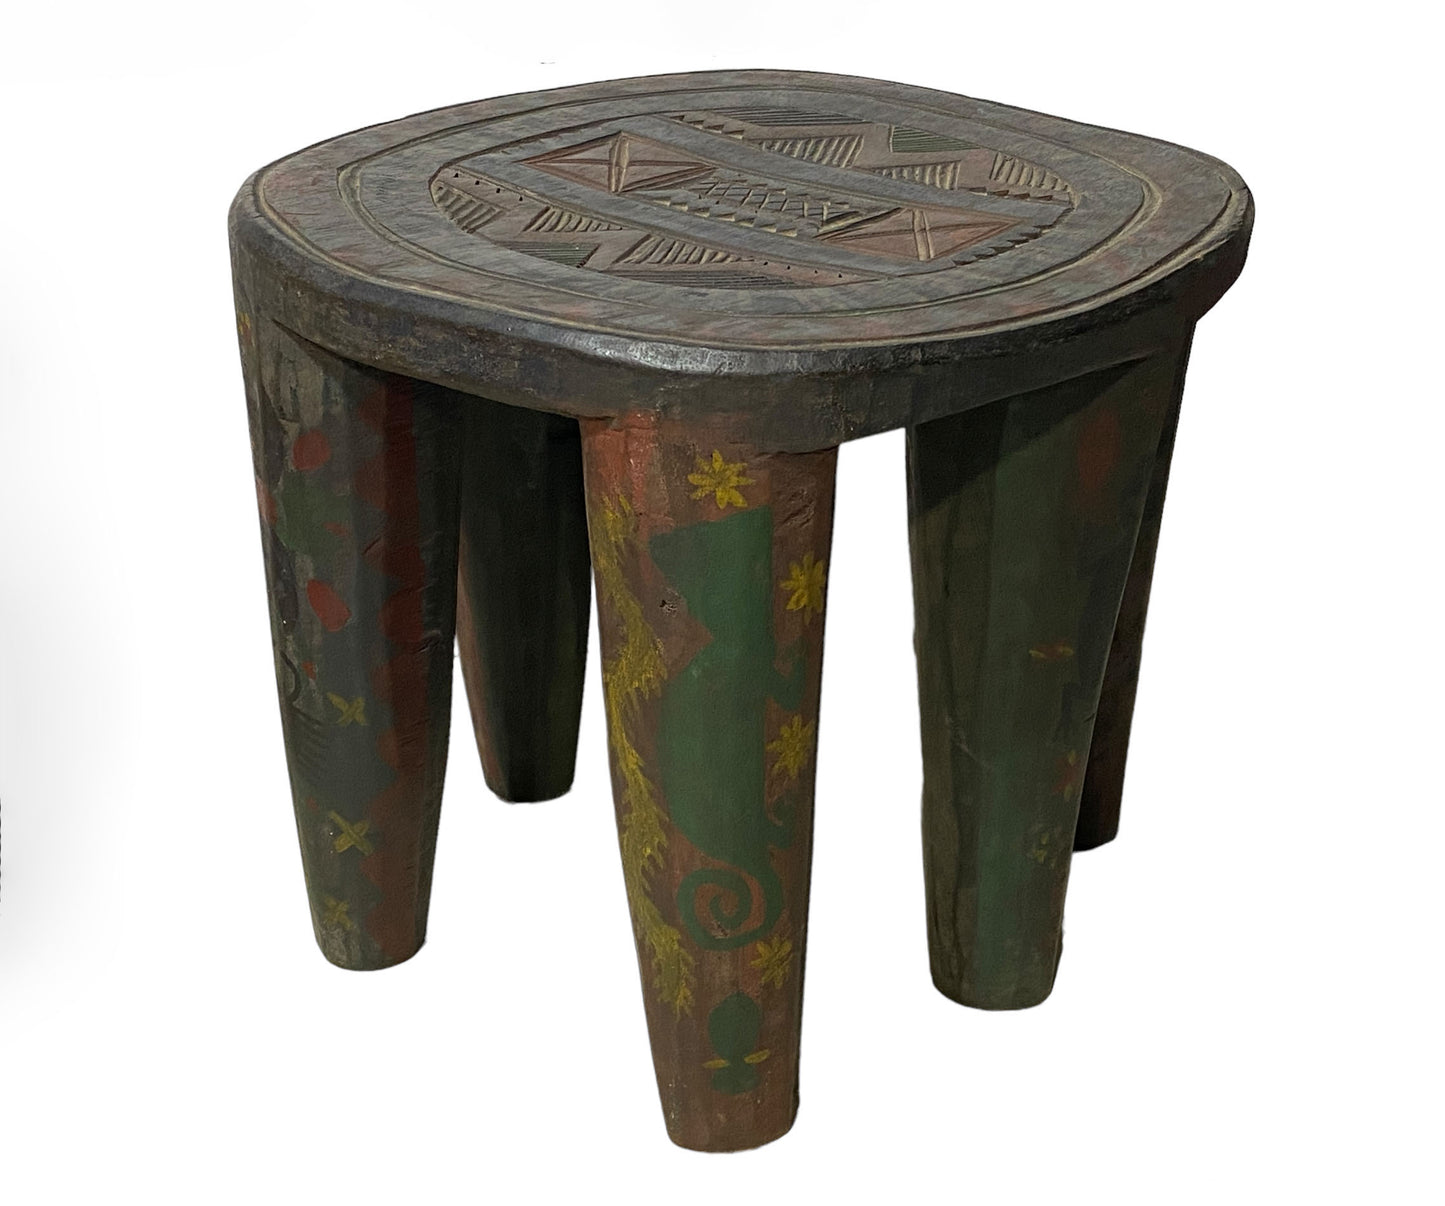 #5546 African LG Colorful  Nupe Stool / Table Nigeria  14" H by 15.25" W